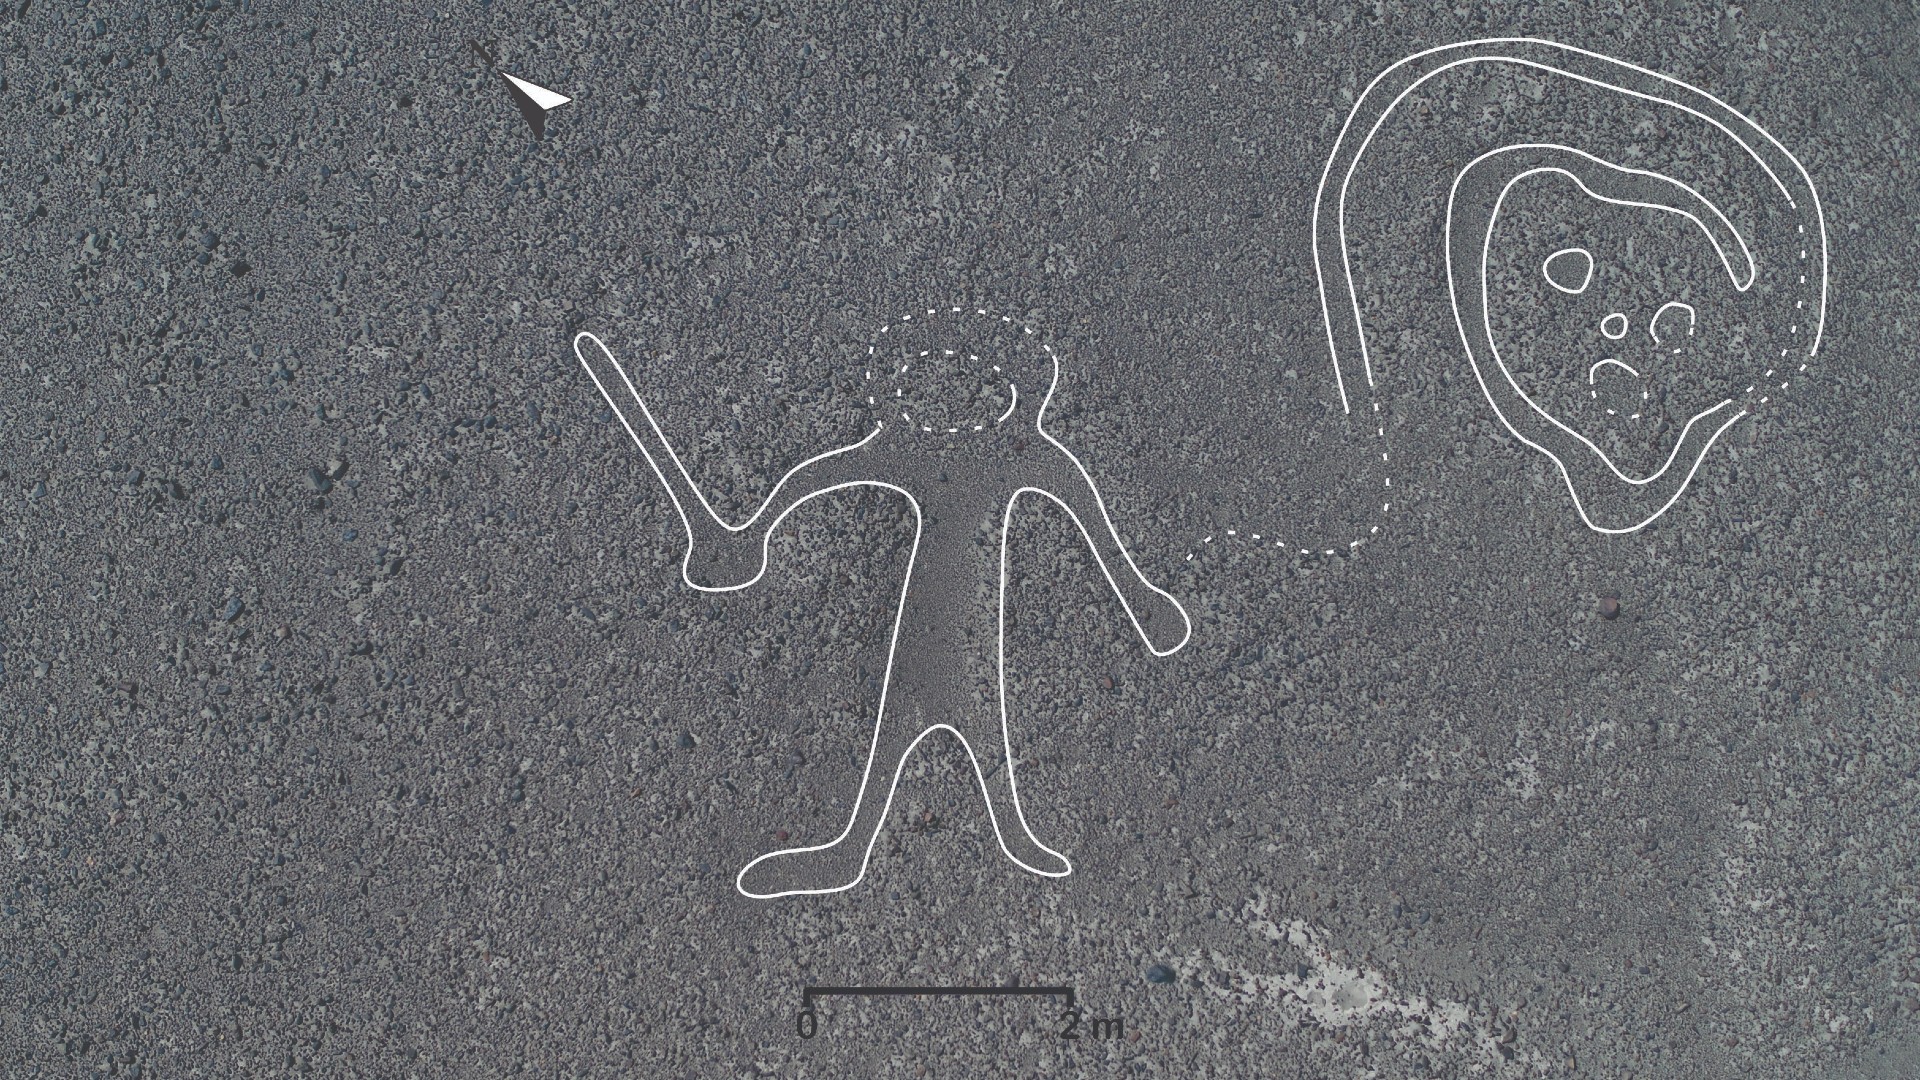 This processed image shows a geoglyph of what may be a person holding what looks like a club or stick as their head flies away in greater detail.